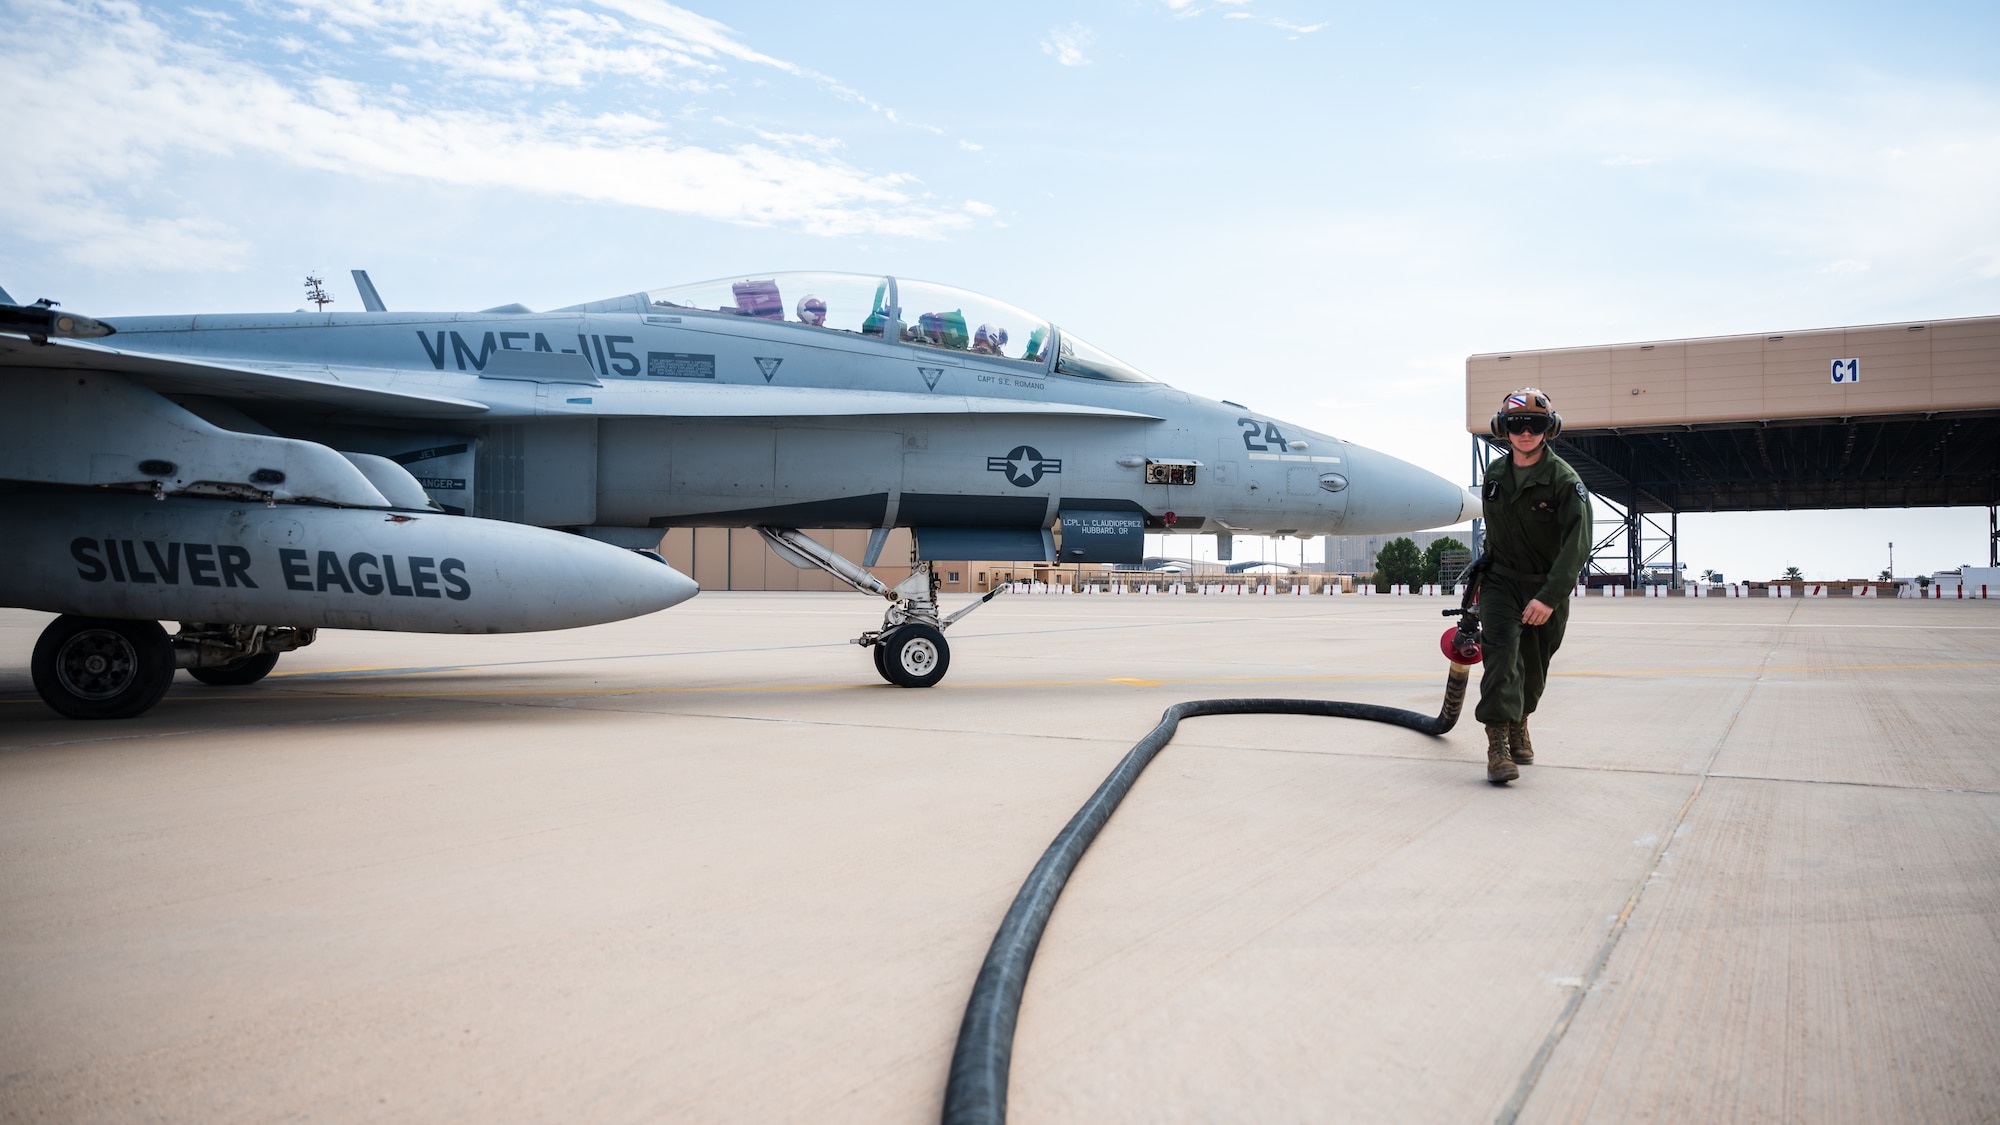 A U.S. Marine from the Marine Fighter Attack Squadron 115 carries a fuel hose after hot-pit refueling an F/A-18 Hornet at Prince Sultan Air Base, Kingdom of Saudi Arabia, Jan. 11, 2022. The VMFA-115 arrived at PSAB in late December, 2021, bringing a squadron of F/A-18s and support personnel to fully integrate into daily operations. (U.S. Air Force photo by Senior Airman Jacob B. Wrightsman)